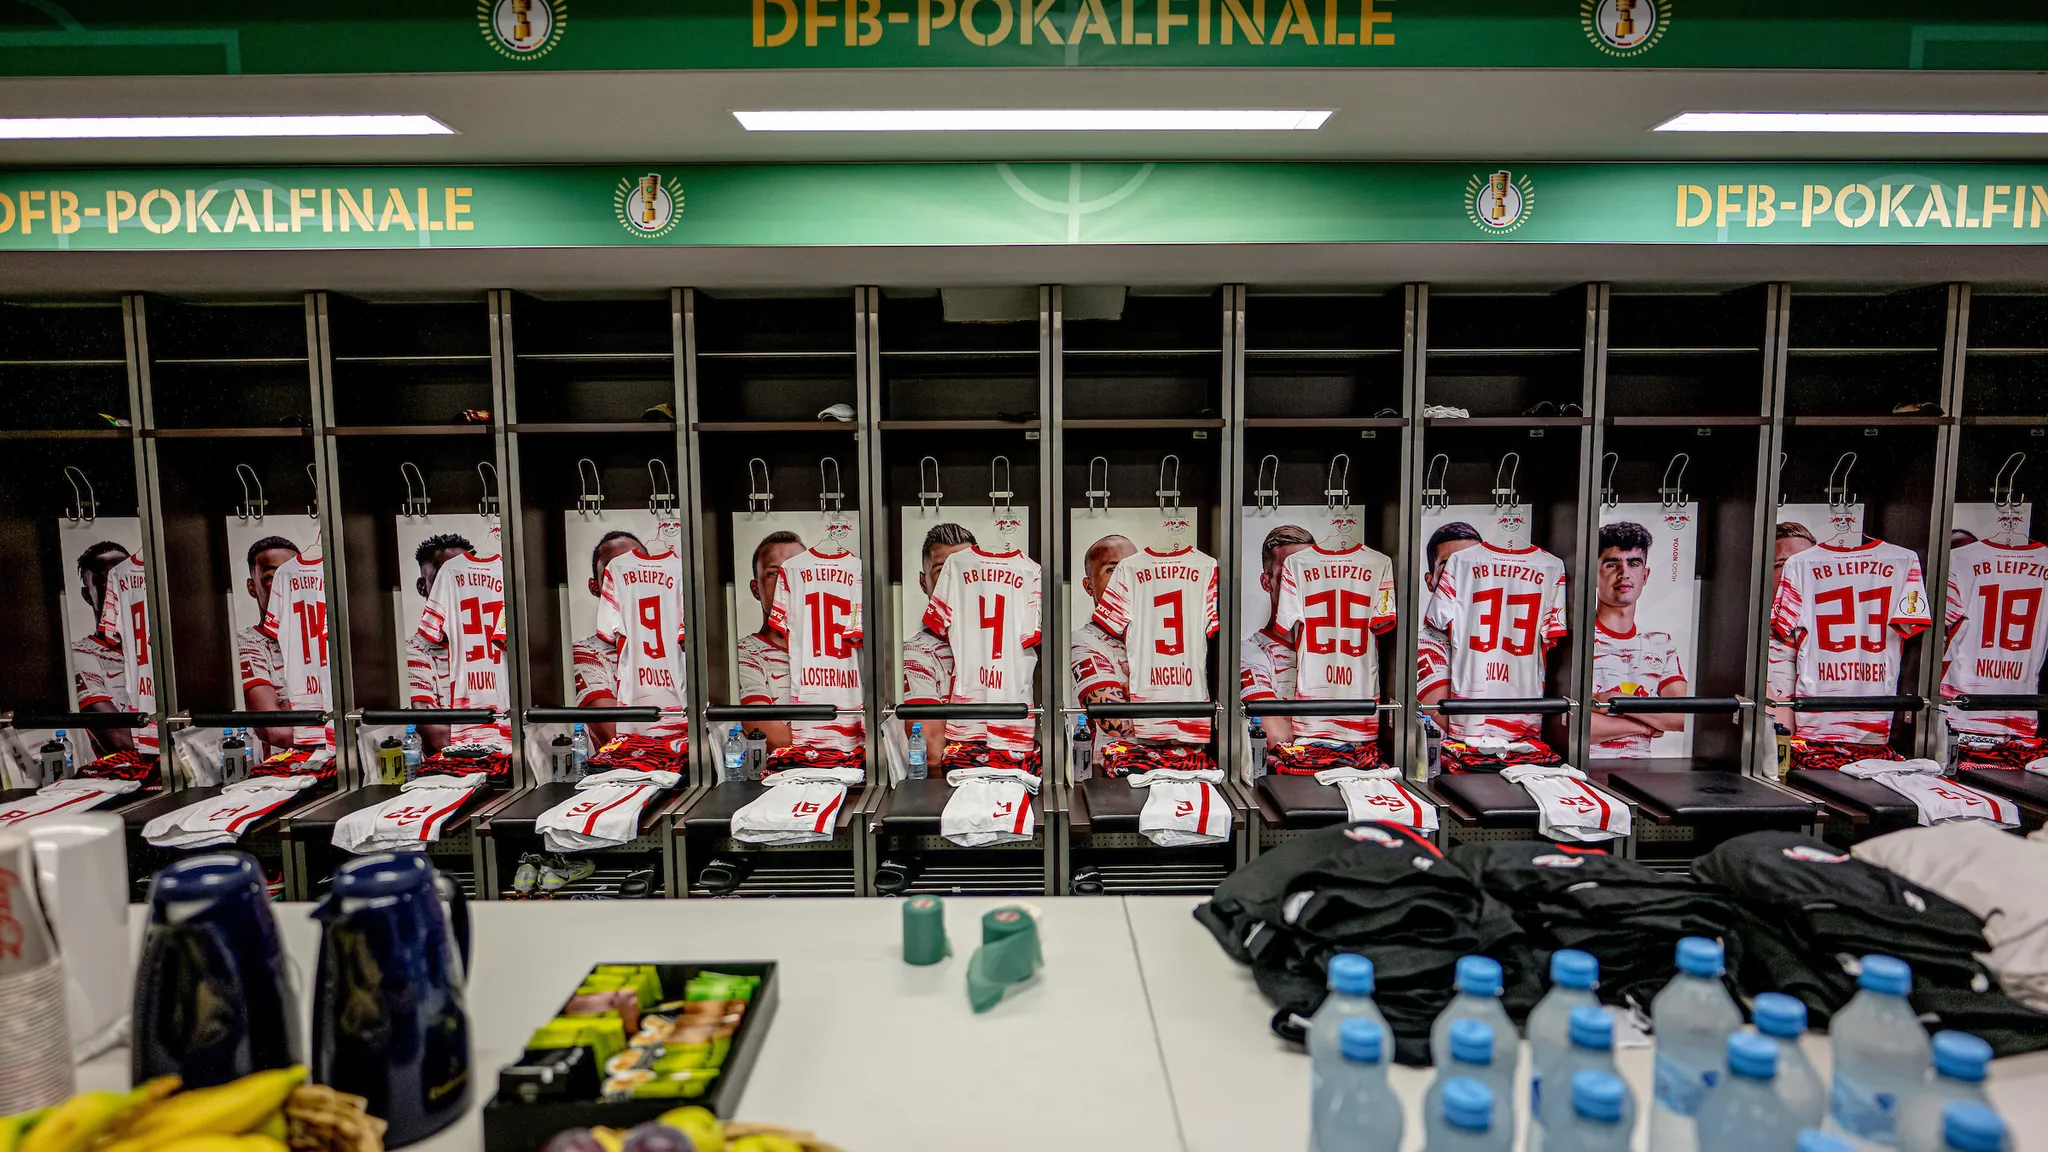 The RB Leipzig kits hanging up in the dressing room before the 2022 DFB-Pokal final in Berlin.